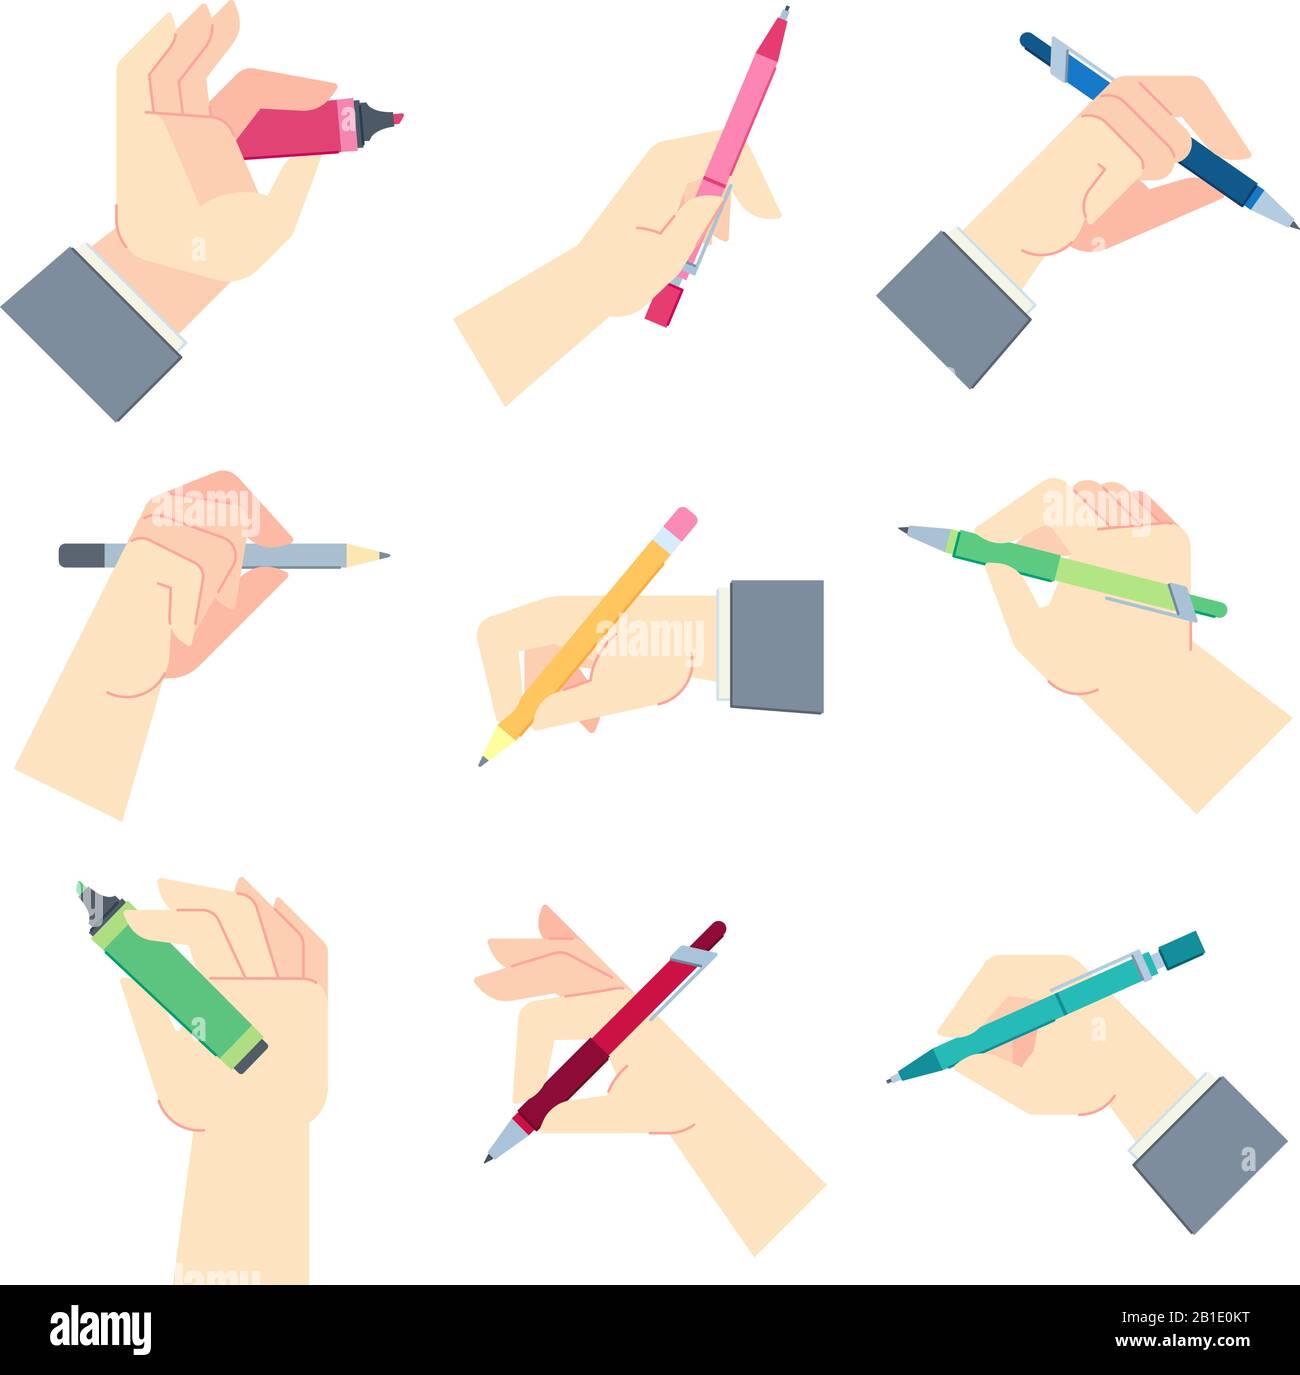 Writing accessories in hands. Pen in businessman hand, write on paper sheet or notepad and hands gestures vector illustration set Stock Vector